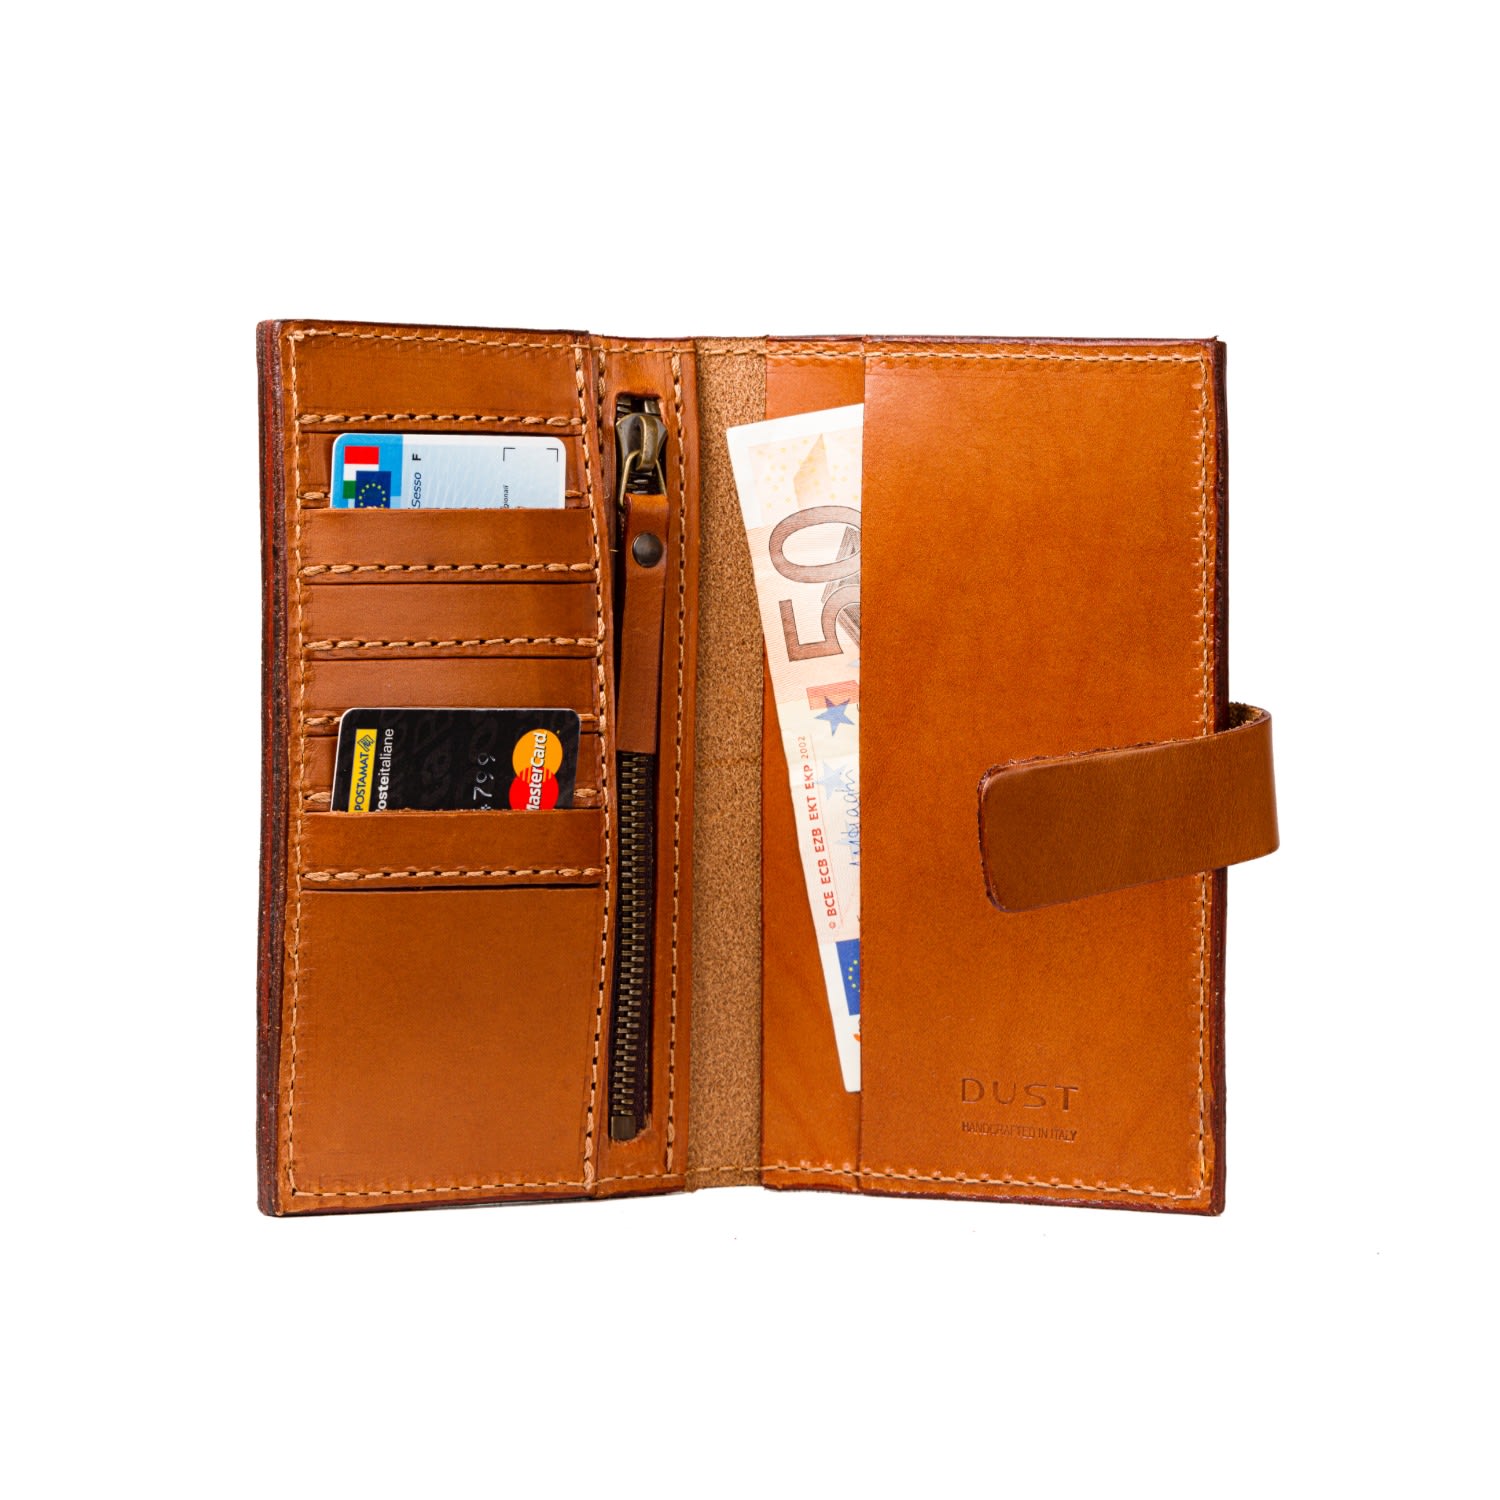 The Dust Company Women's Leather Wallet Vintage Brown In Orange